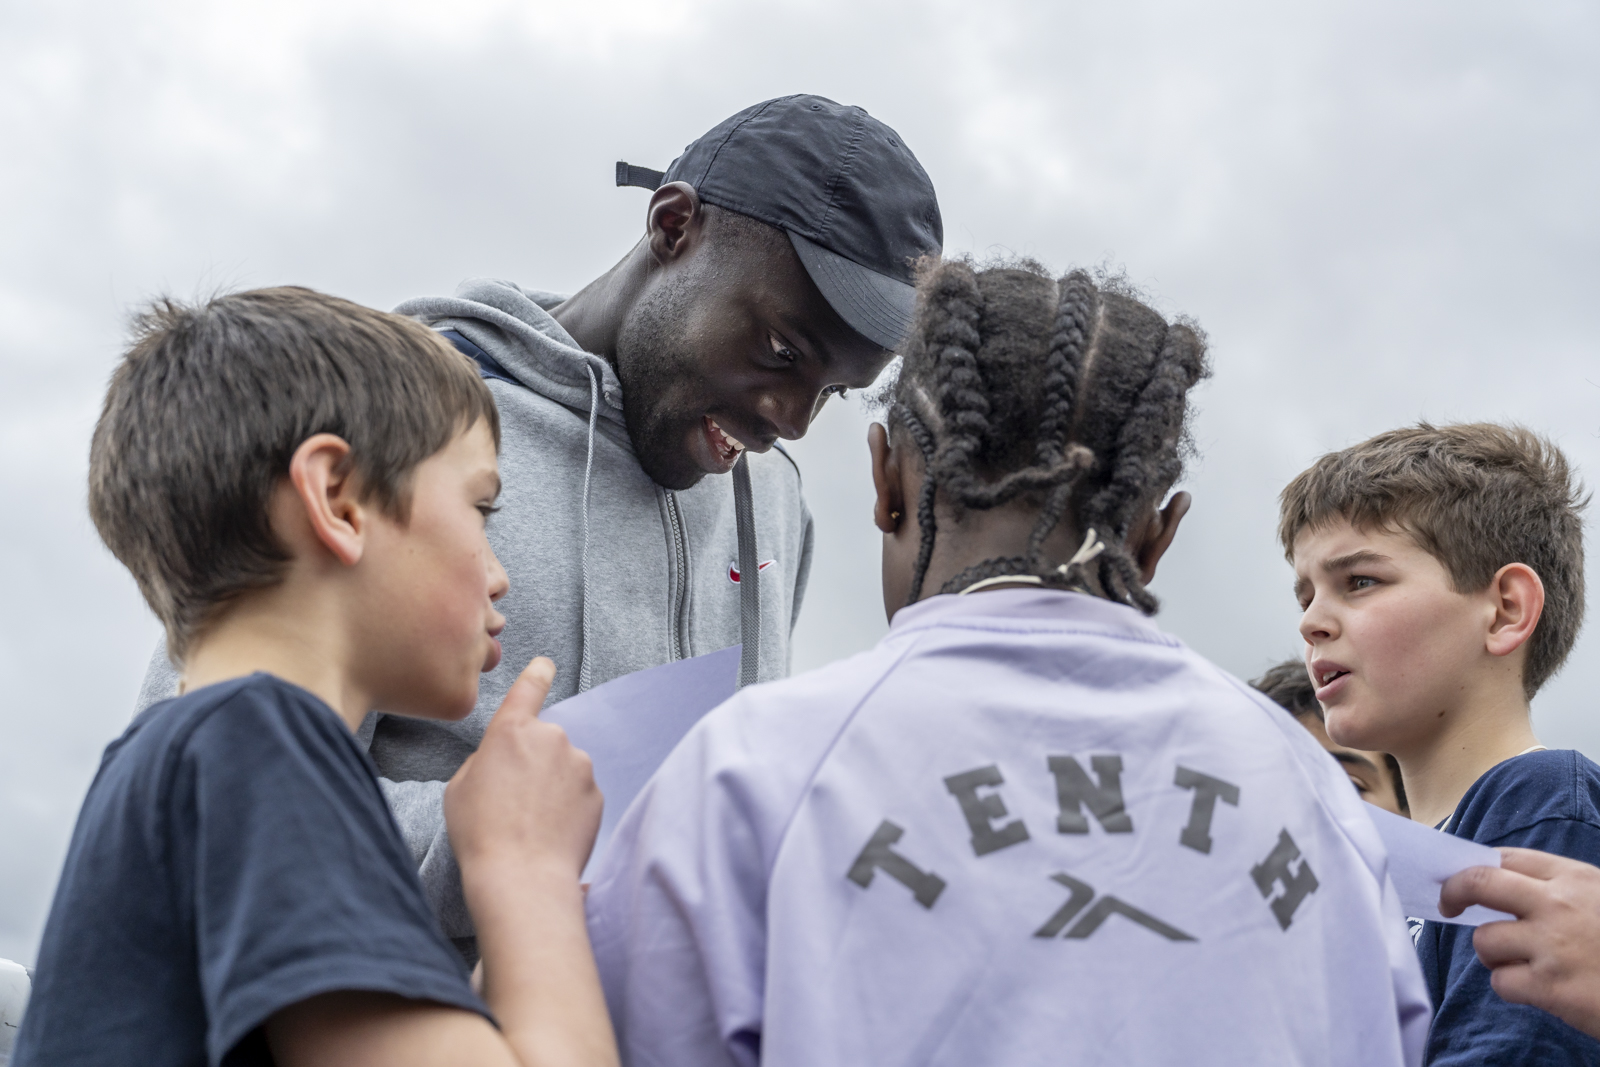 Charles-Antoine Kouakou is surrounded by three children and signing autographs.